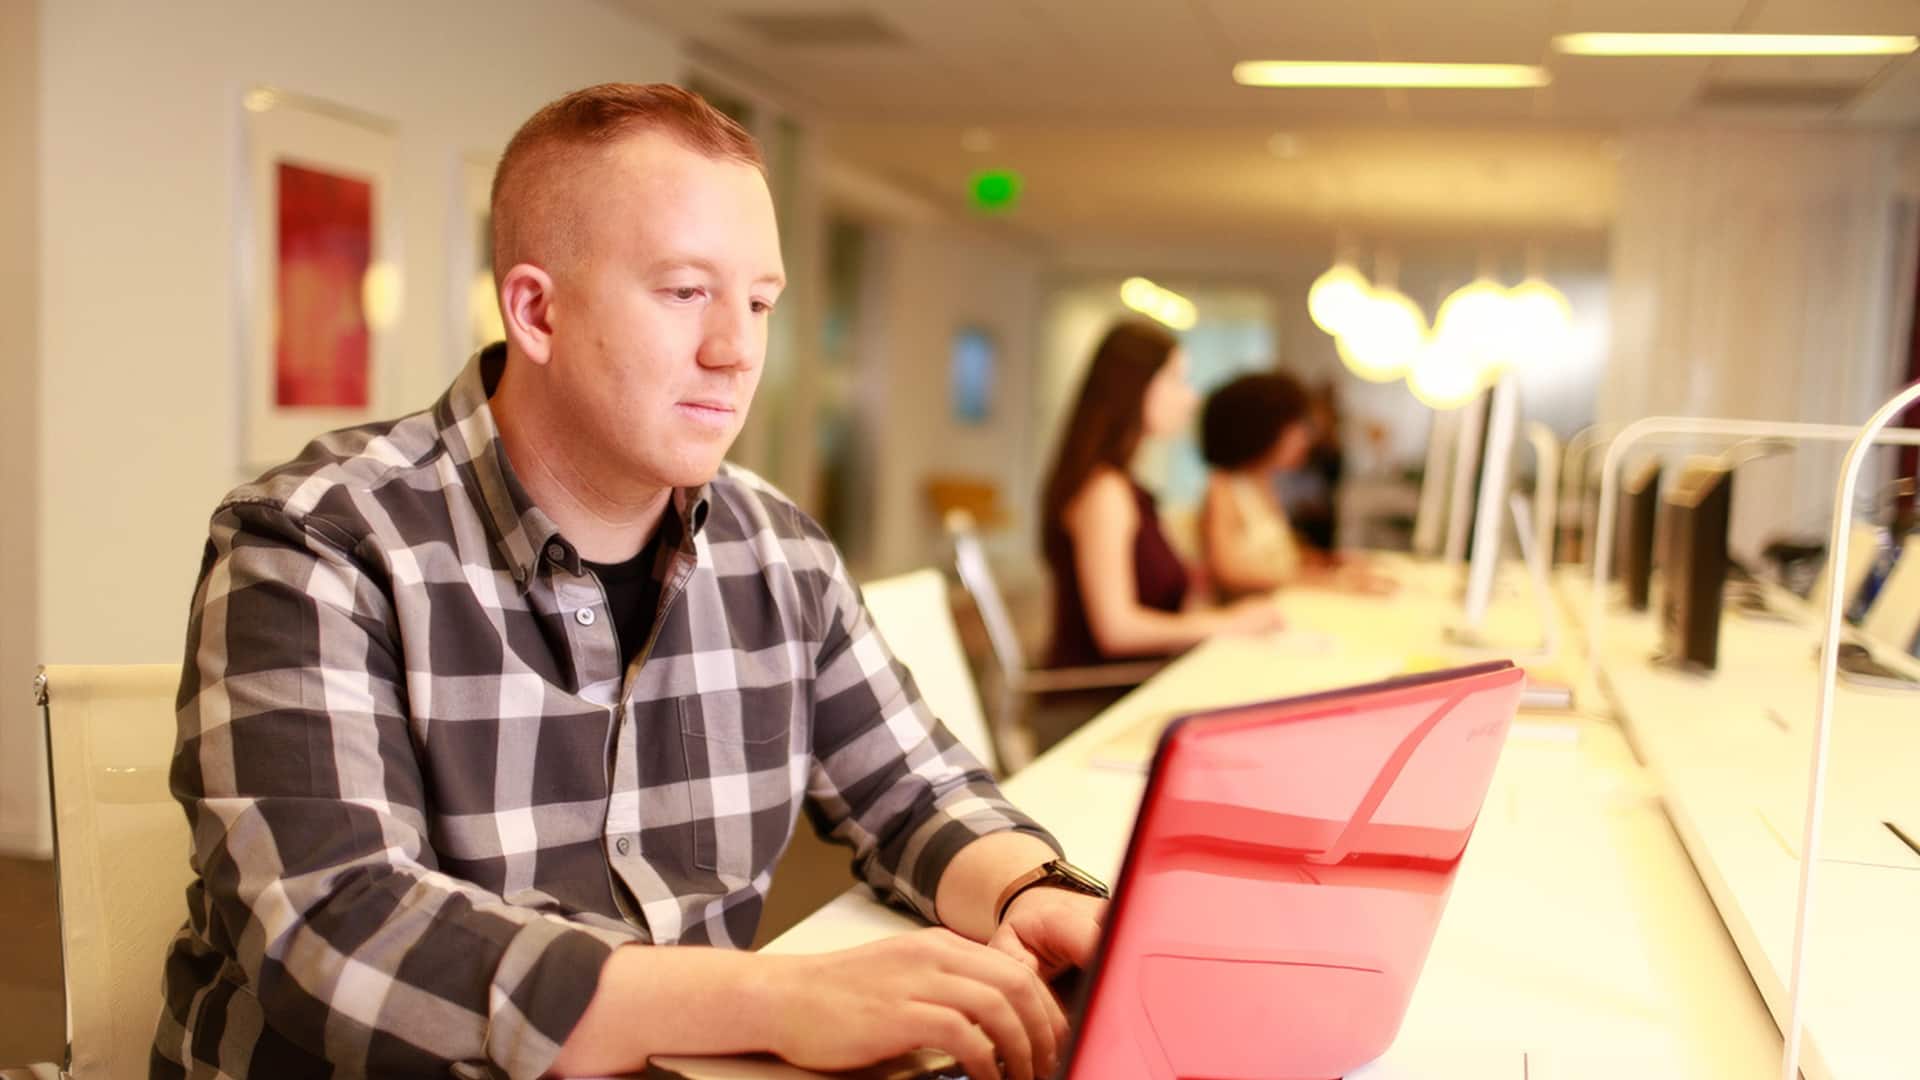 Kevin Deveraux wearing a black and grey plain buttondown shirt working on a red laptop.